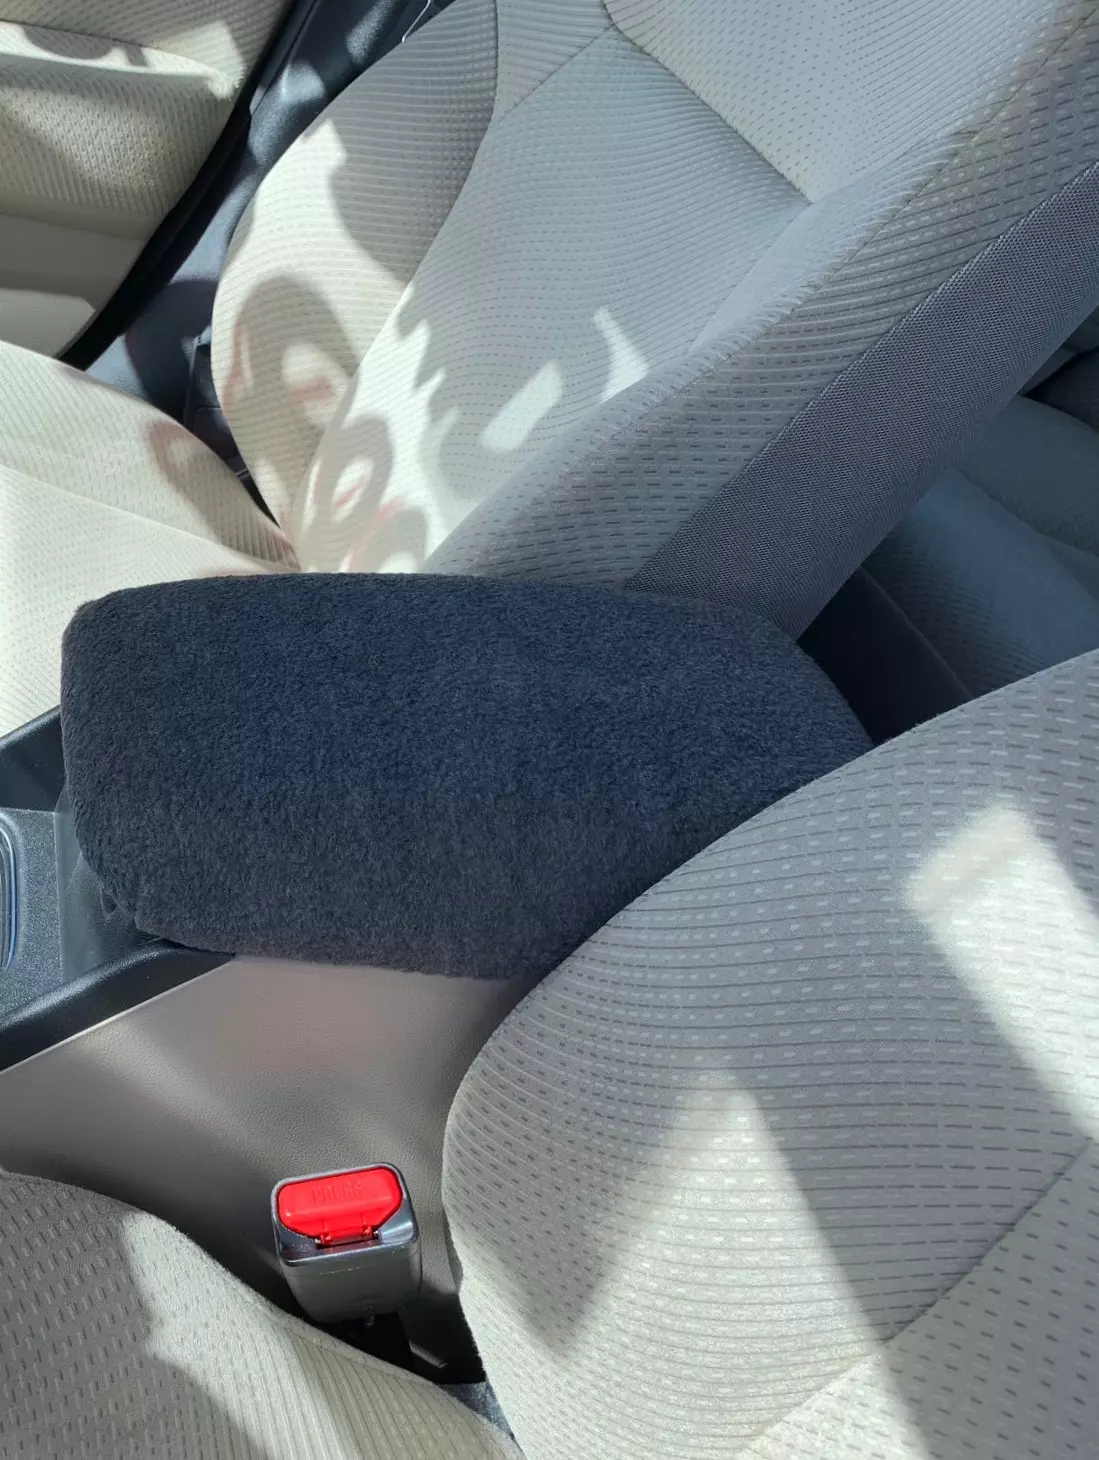 Buy Center Console Armrest Cover Fits the Buick Lucerne 2006-2007- Fleece Material